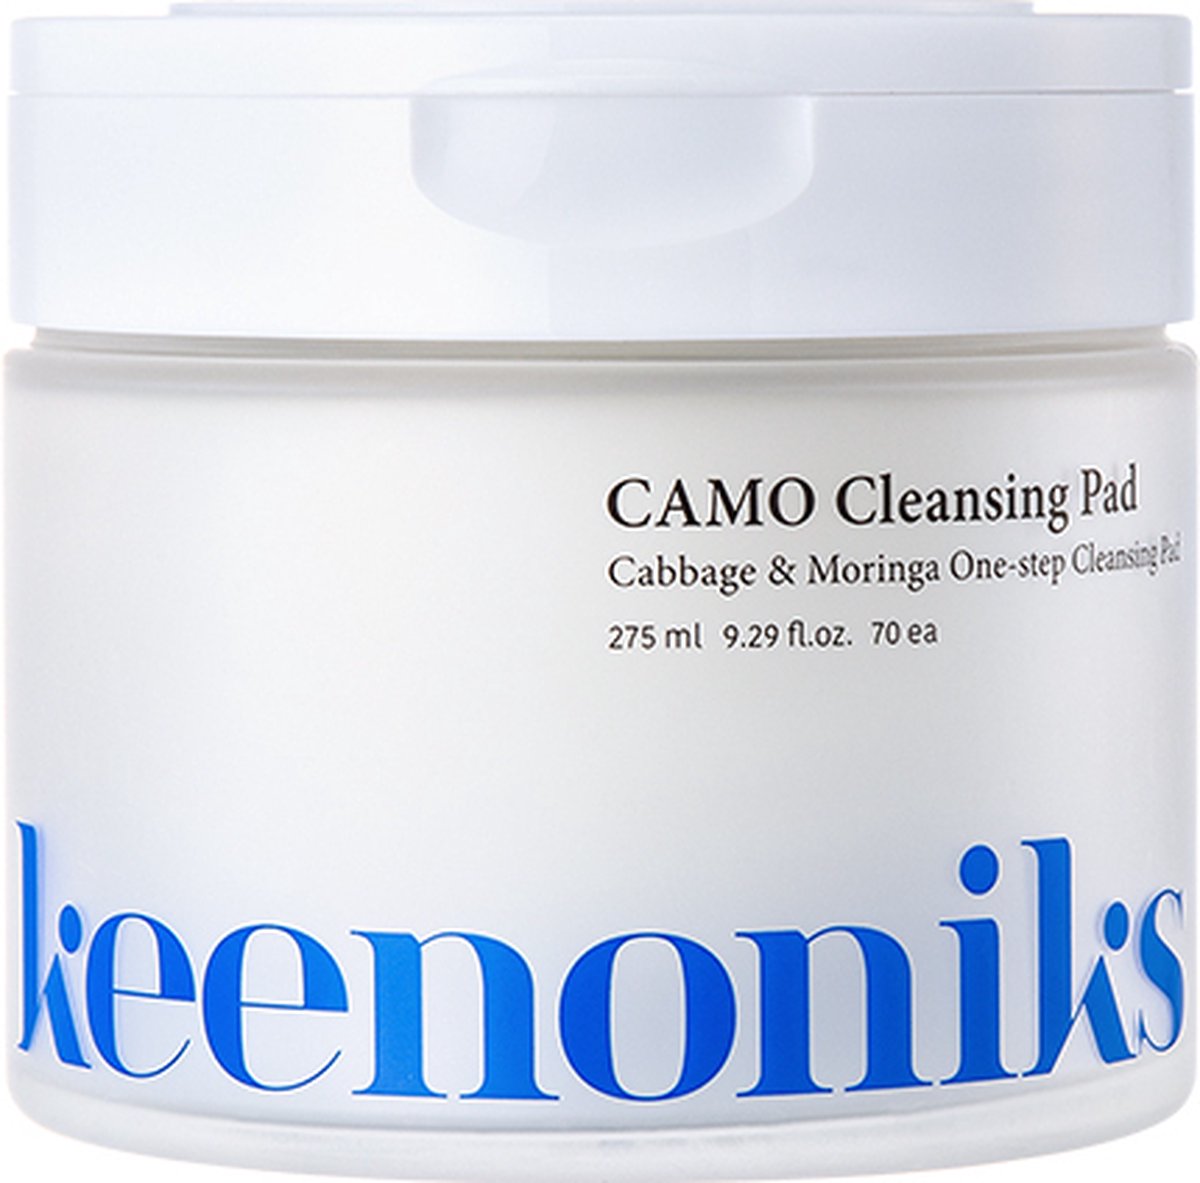 Keenoniks - Camo Cleansing Pads - Cleanser